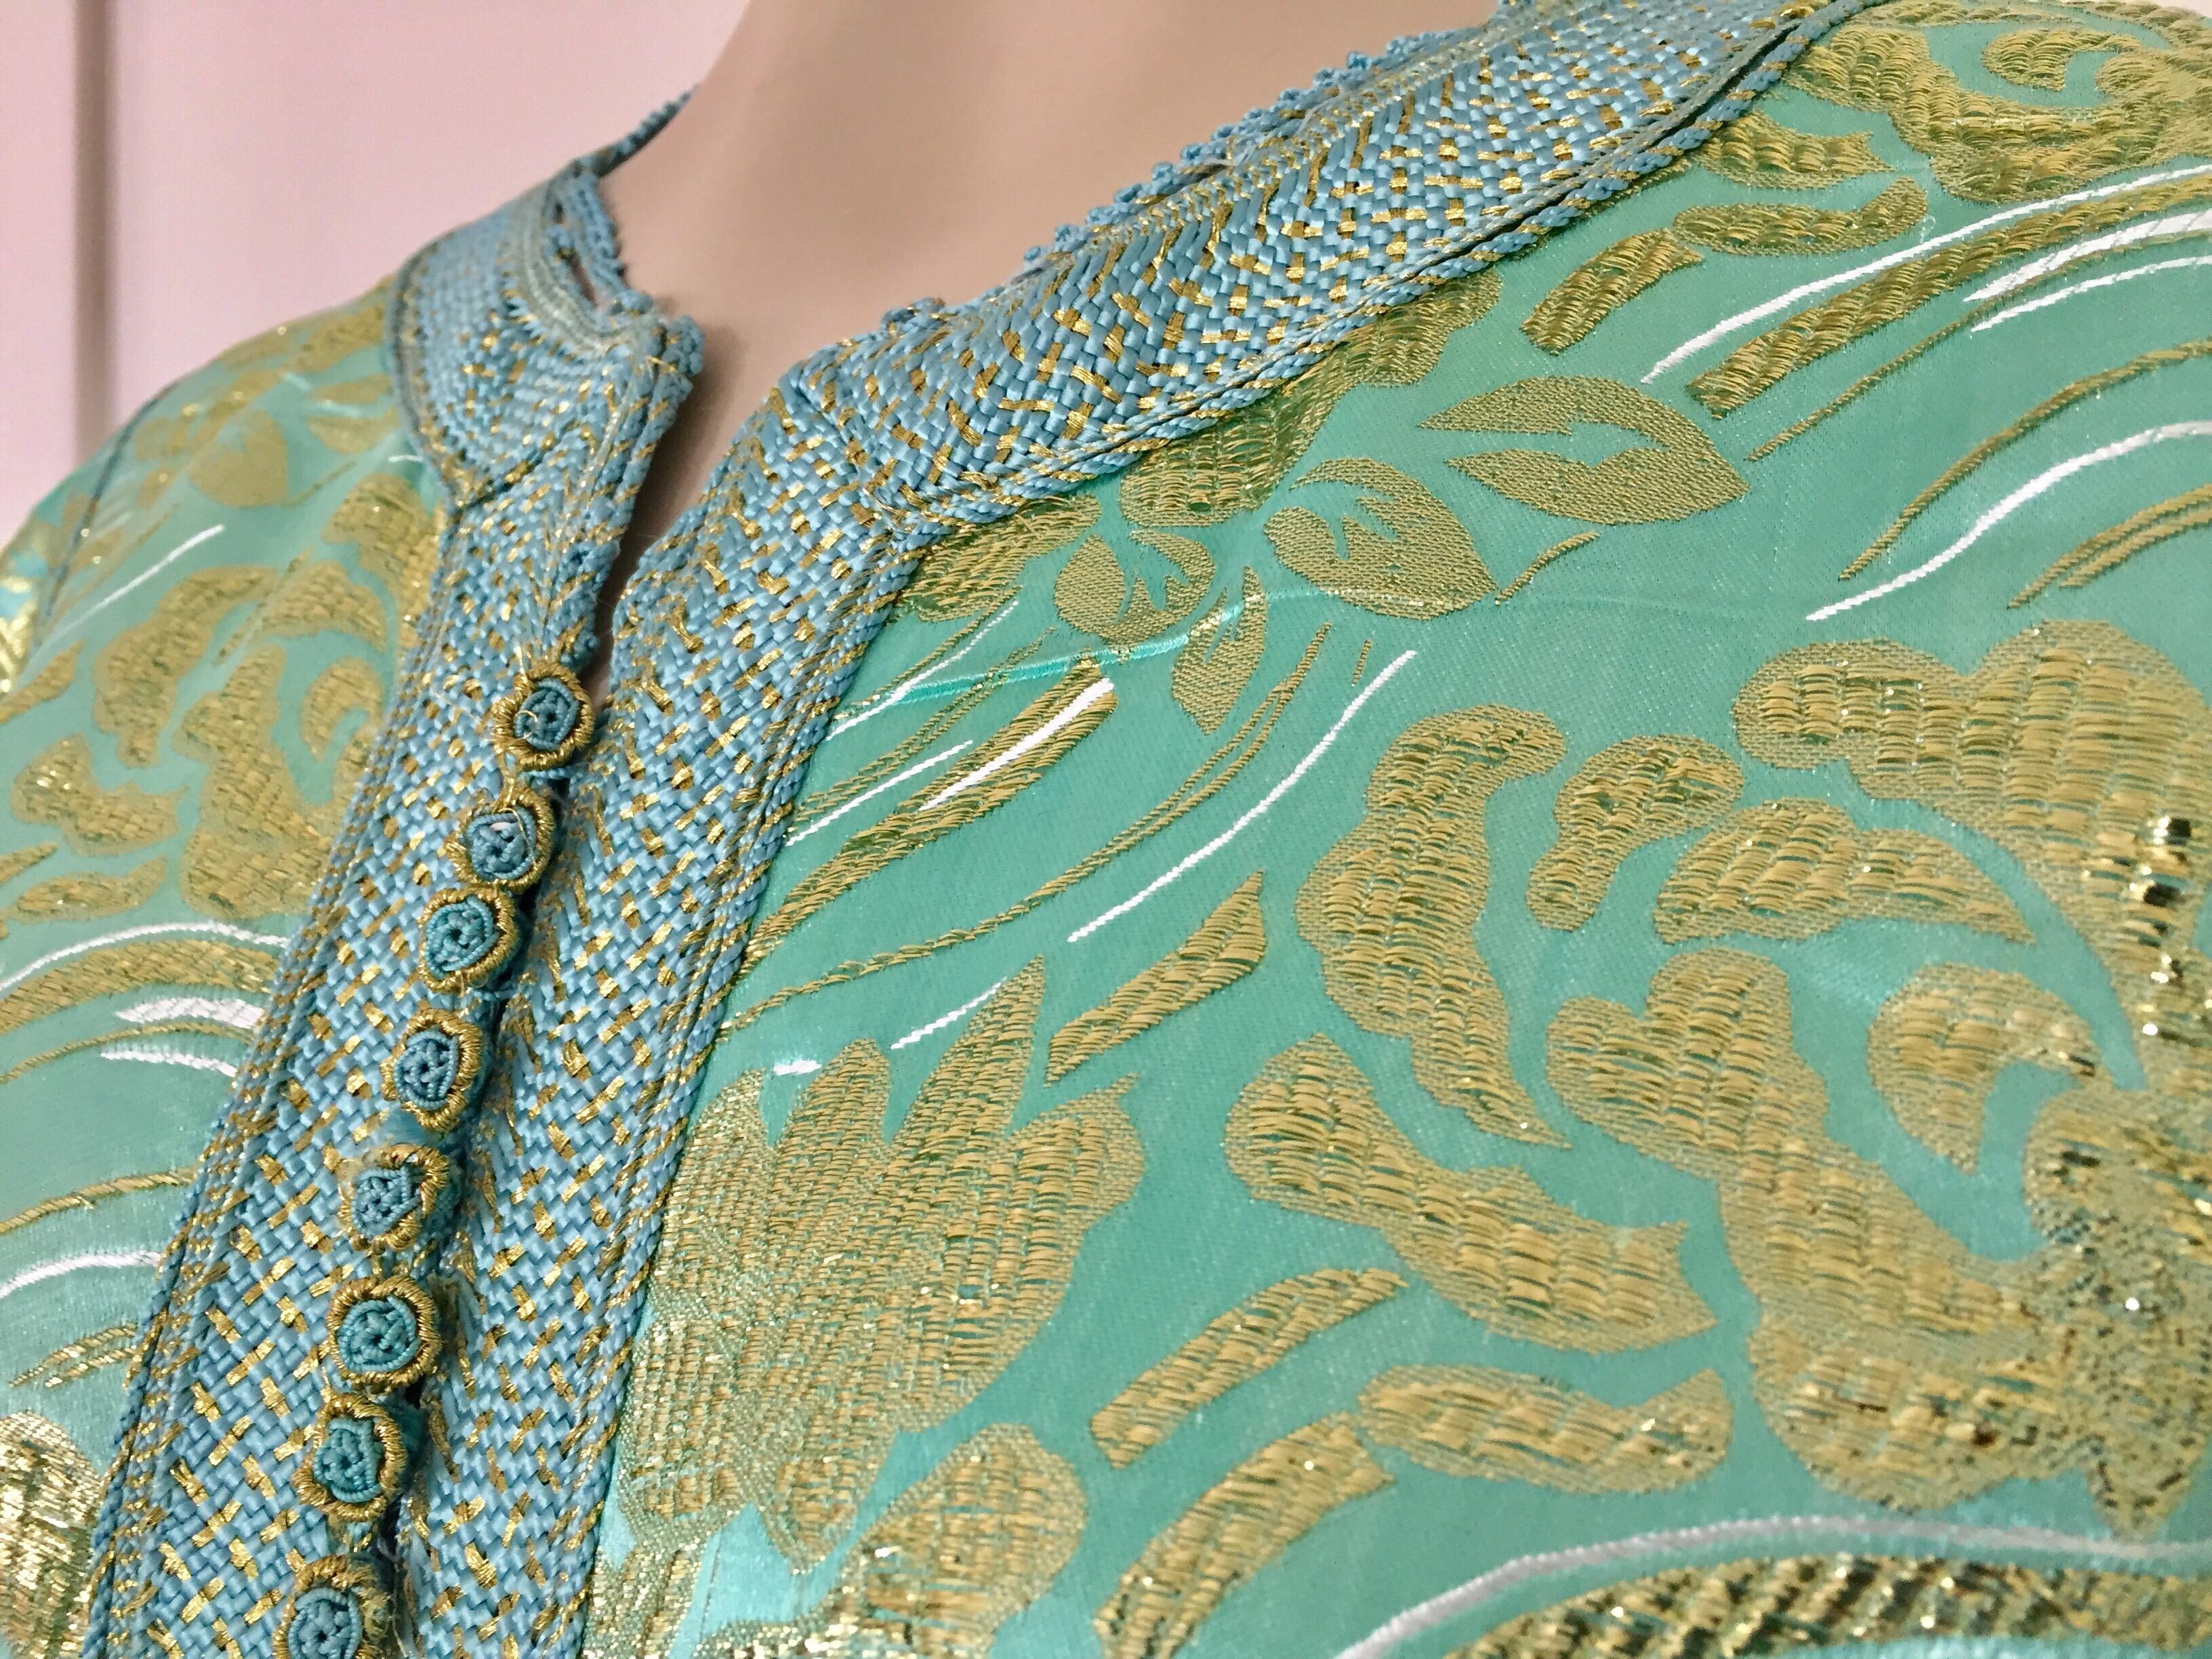 Moroccan Vintage Kaftan in Turquoise and Gold Floral Brocade Metallic Lame - 1 For Sale 4